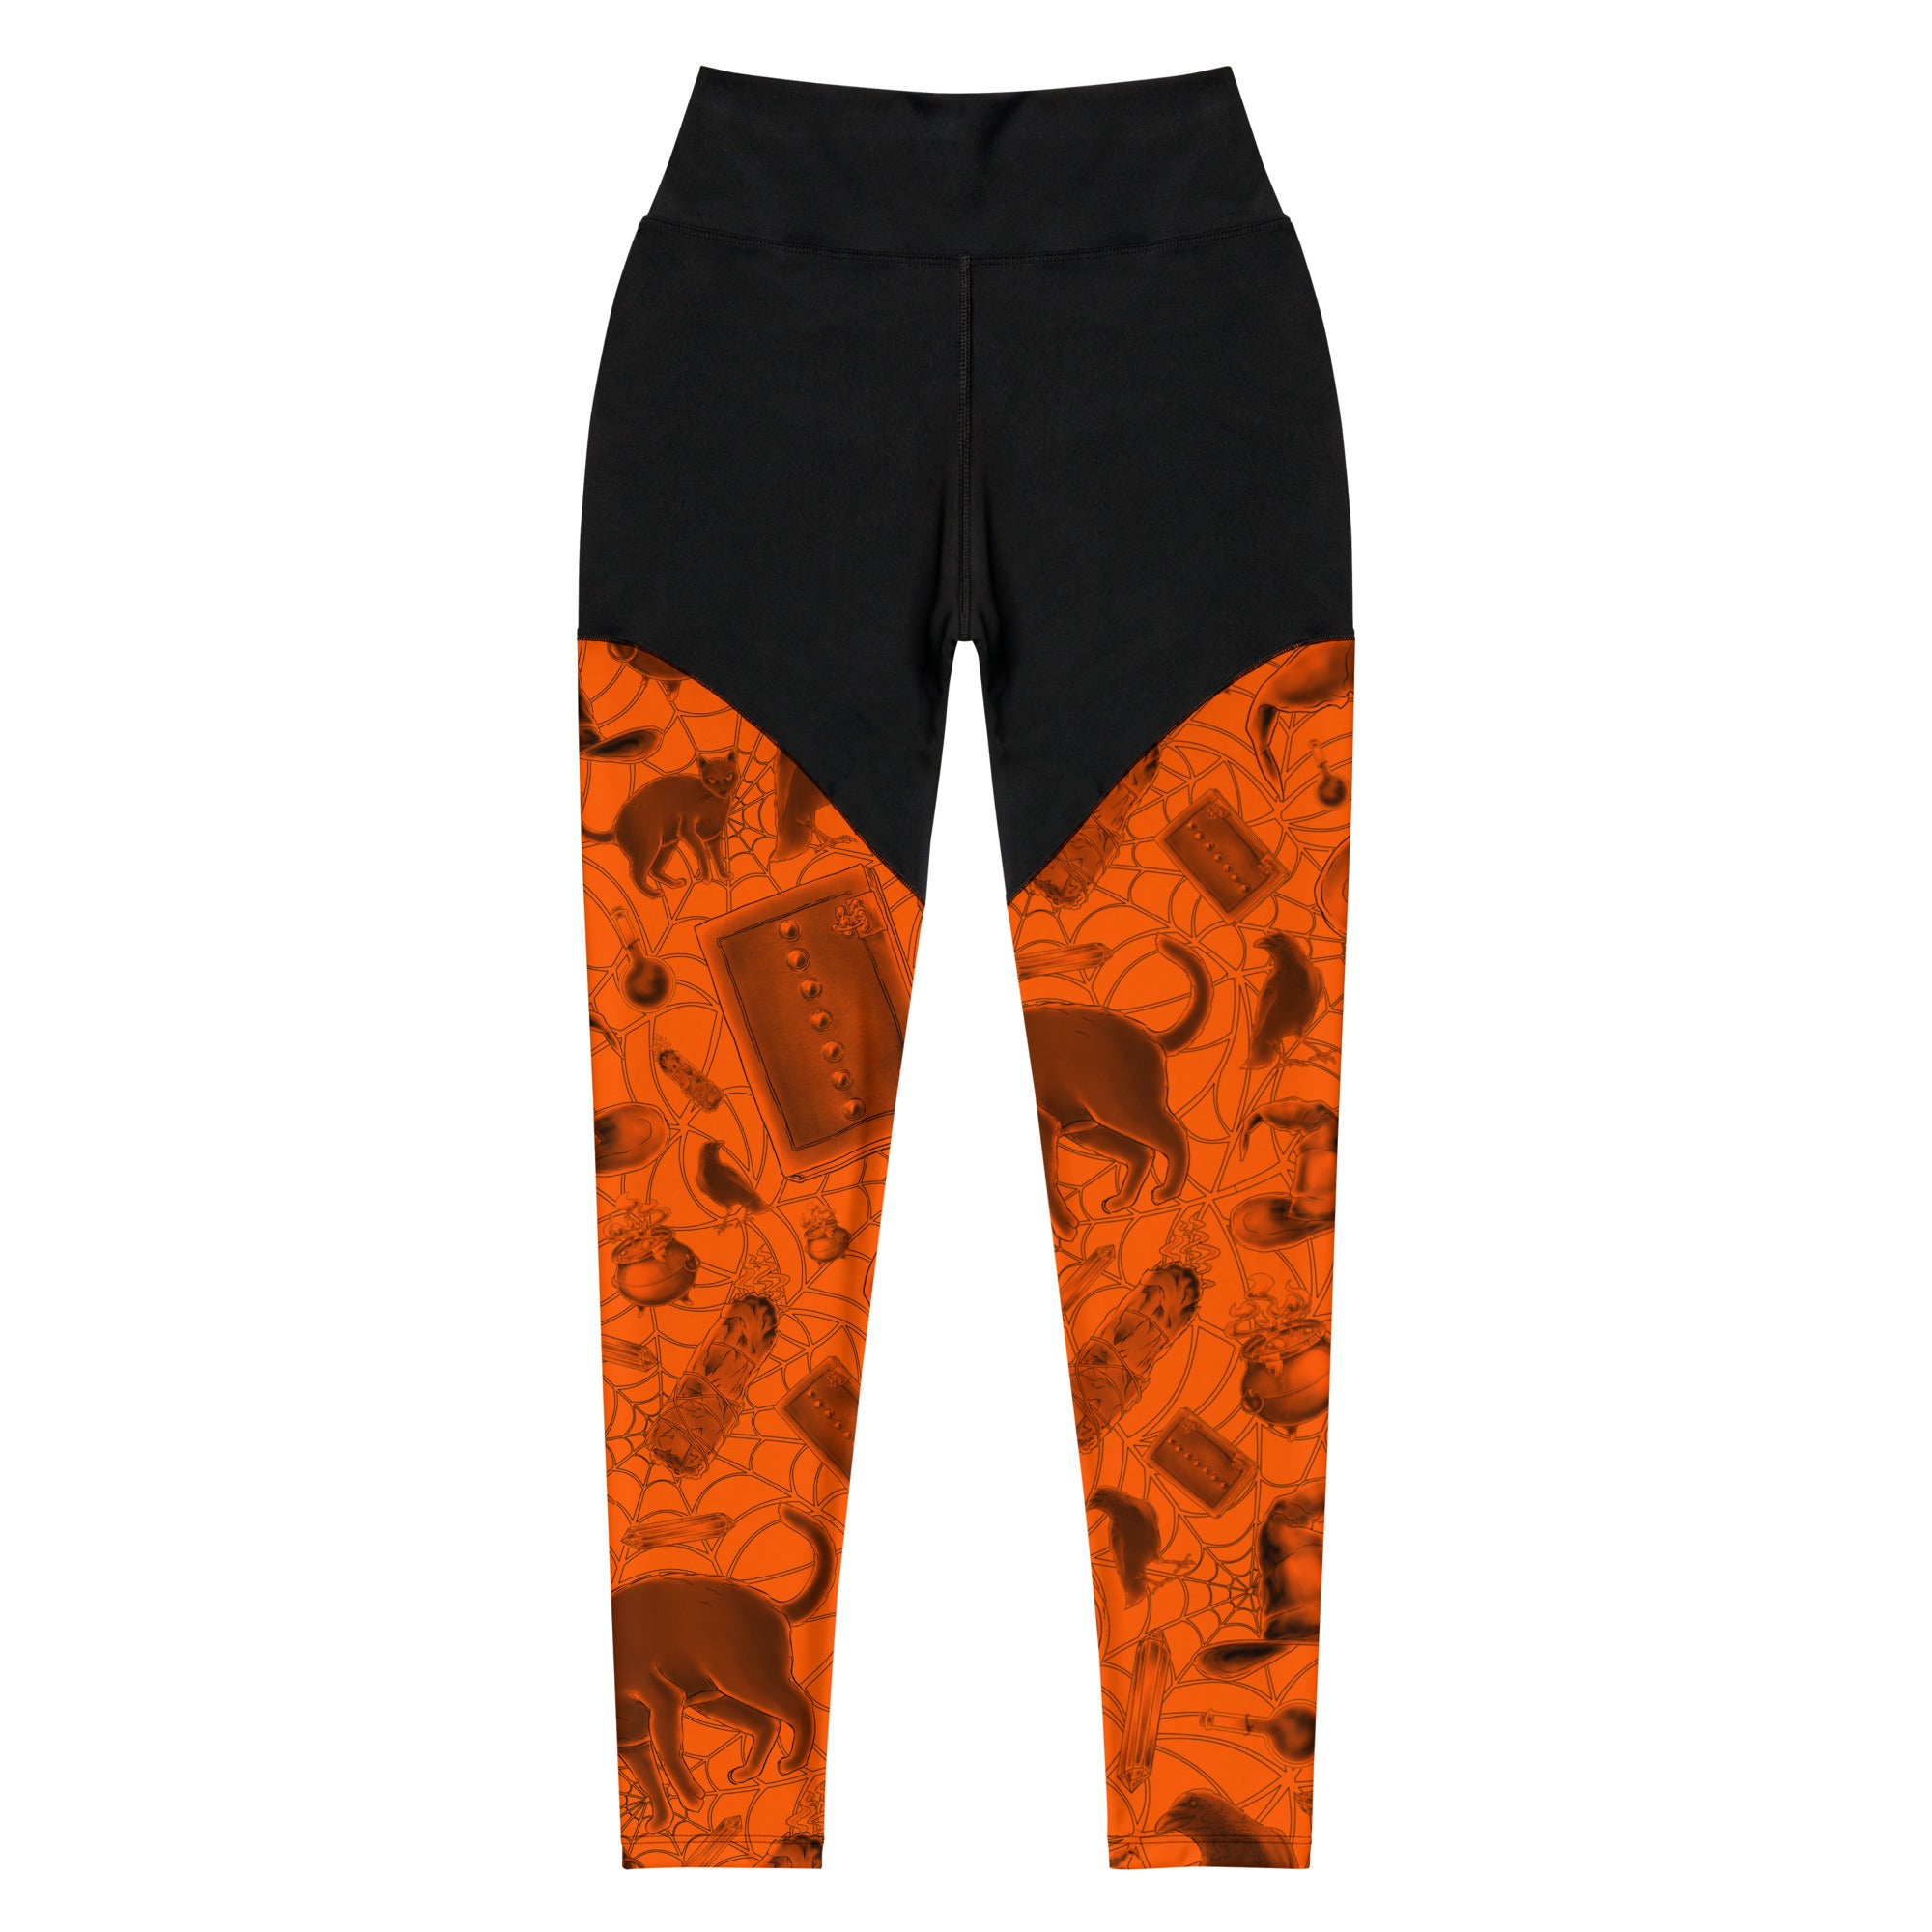 Witch's Lair Sports Leggings